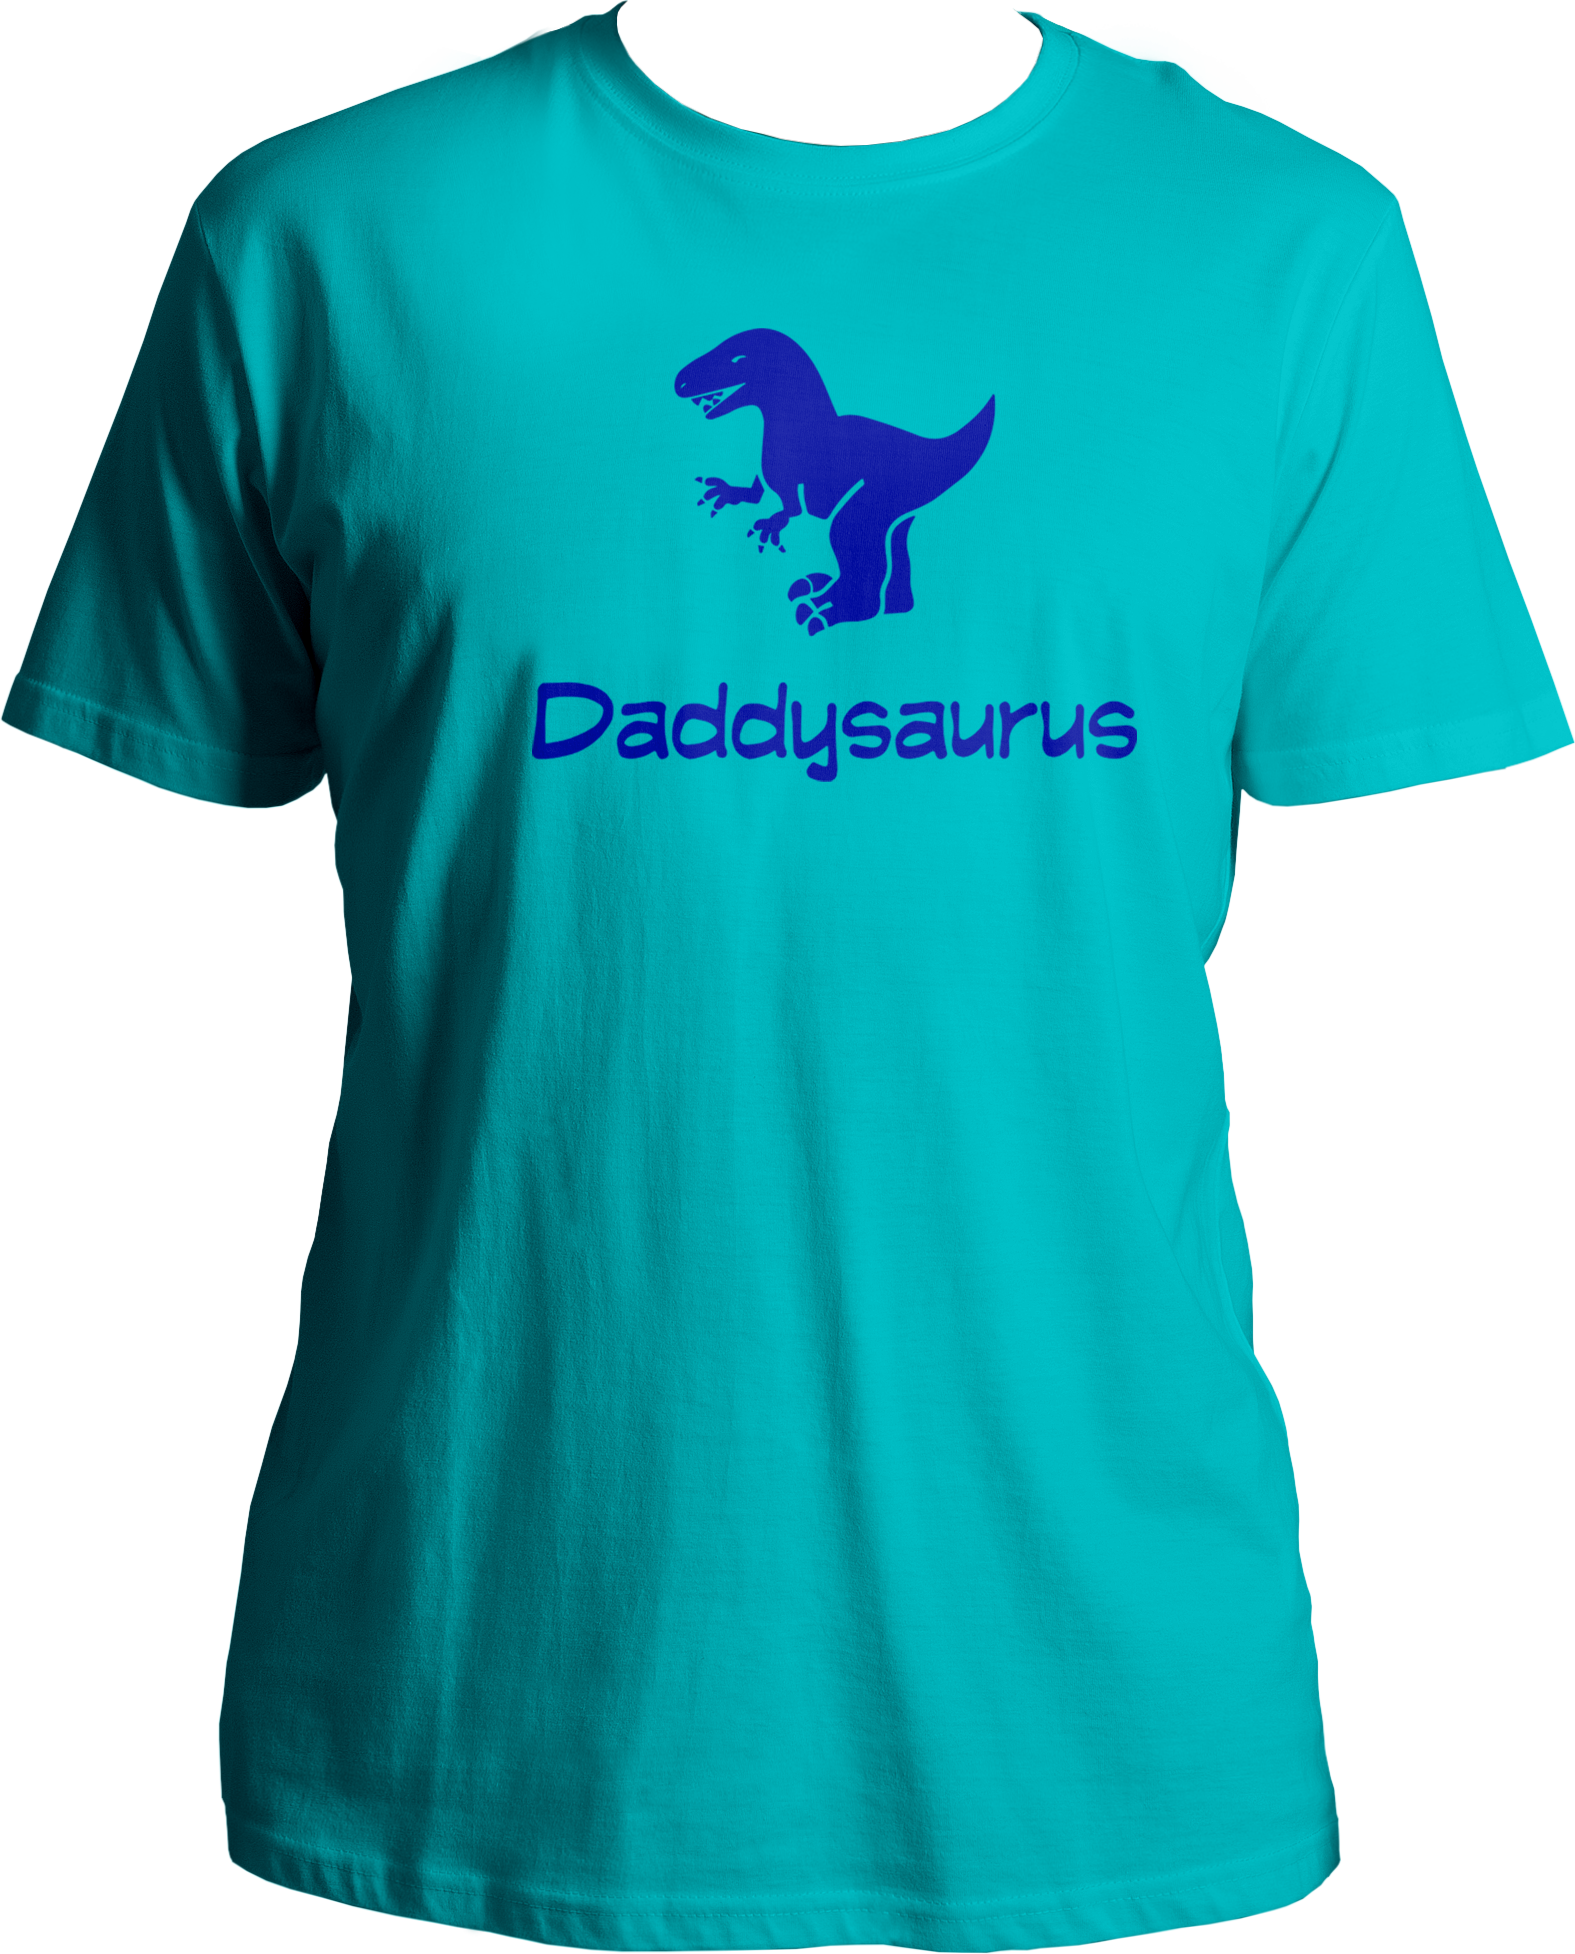 Introducing our exclusive Daddysaurus Unisex T-Shirts, perfect for the modern dad! Our collection features unique designs tailored for fatherhood celebrations, making birthdays and Father's Day truly special. Crafted with comfort and style in mind, these shirts are a must-have for every doting dad. Shop now at Garrari.com and let your dad roar with pride in his Daddysaurus attire!